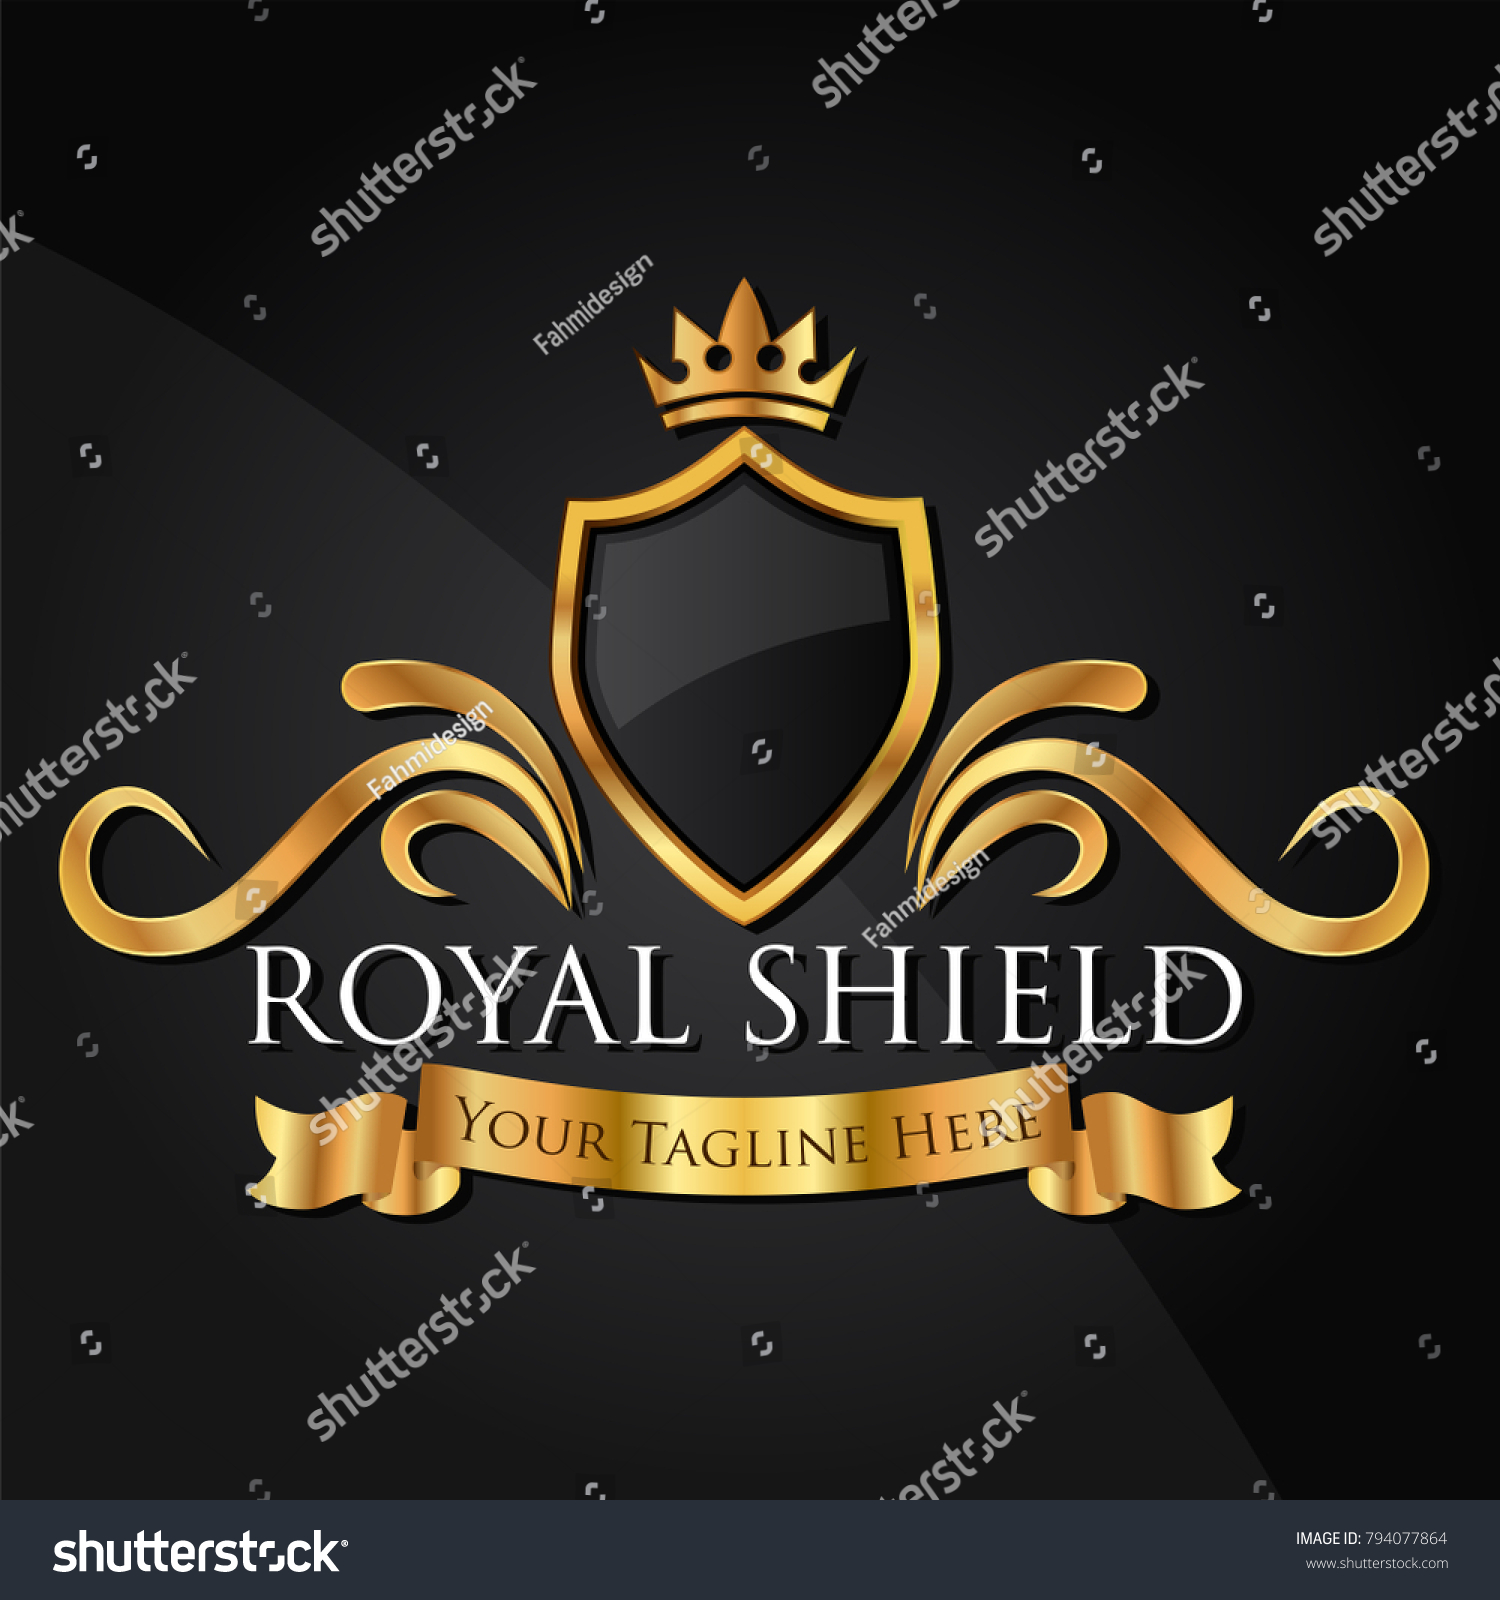 Luxury Golden Vector Shields Crown Ribbons Stock Vector (Royalty Free ...